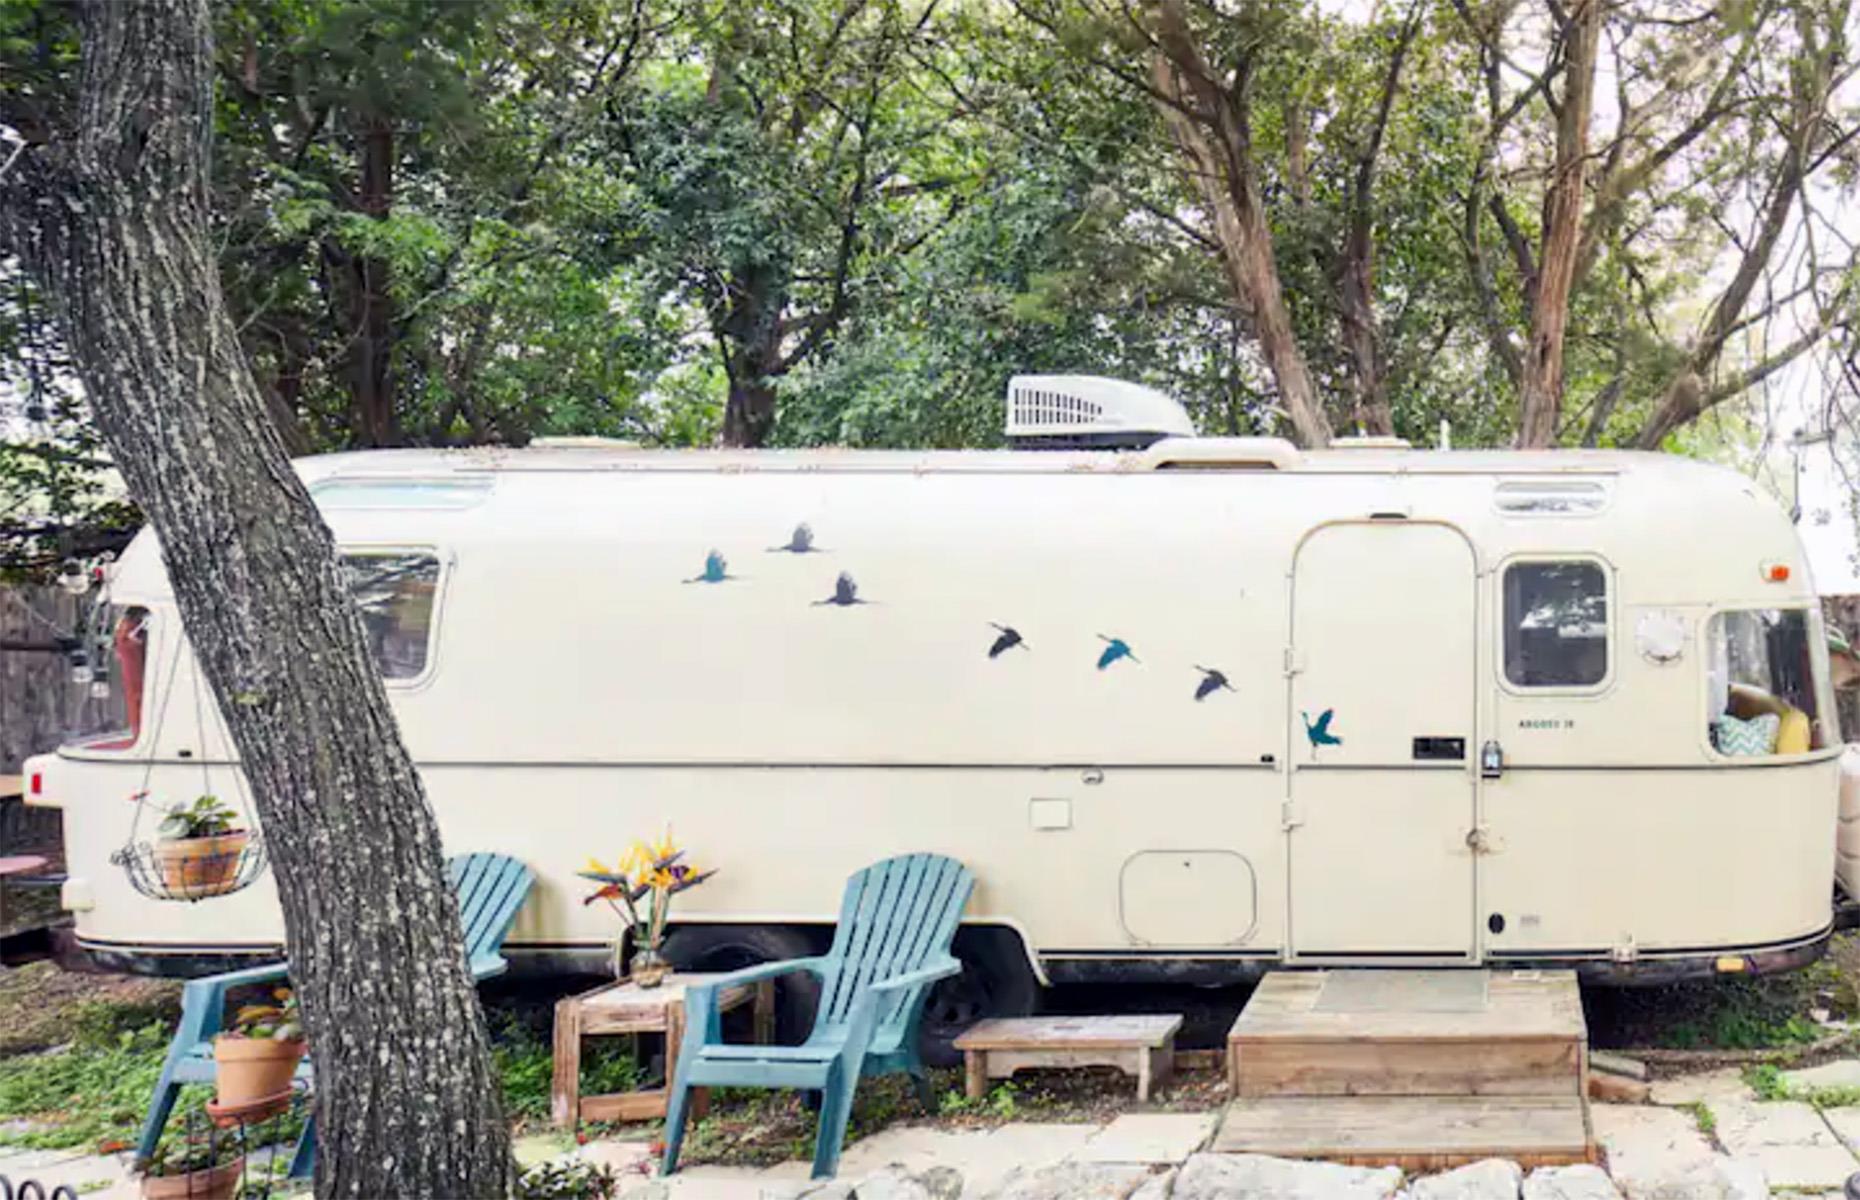 <p>This retro <a href="https://www.airbnb.com/rooms/19473894?source_impression_id=p3_1718031728_P3Nd3IvbPdOIptaA">Airstream Argosy</a> in the heart of Old Austin is the perfect way to enjoy the hippest city in Texas. Decorated in a throwback style, it’s set in a large, shaded backyard decorated with fairy lights and its own dance stage. Best of all, Austin’s best coffee and tacos are just a short walk away.</p>